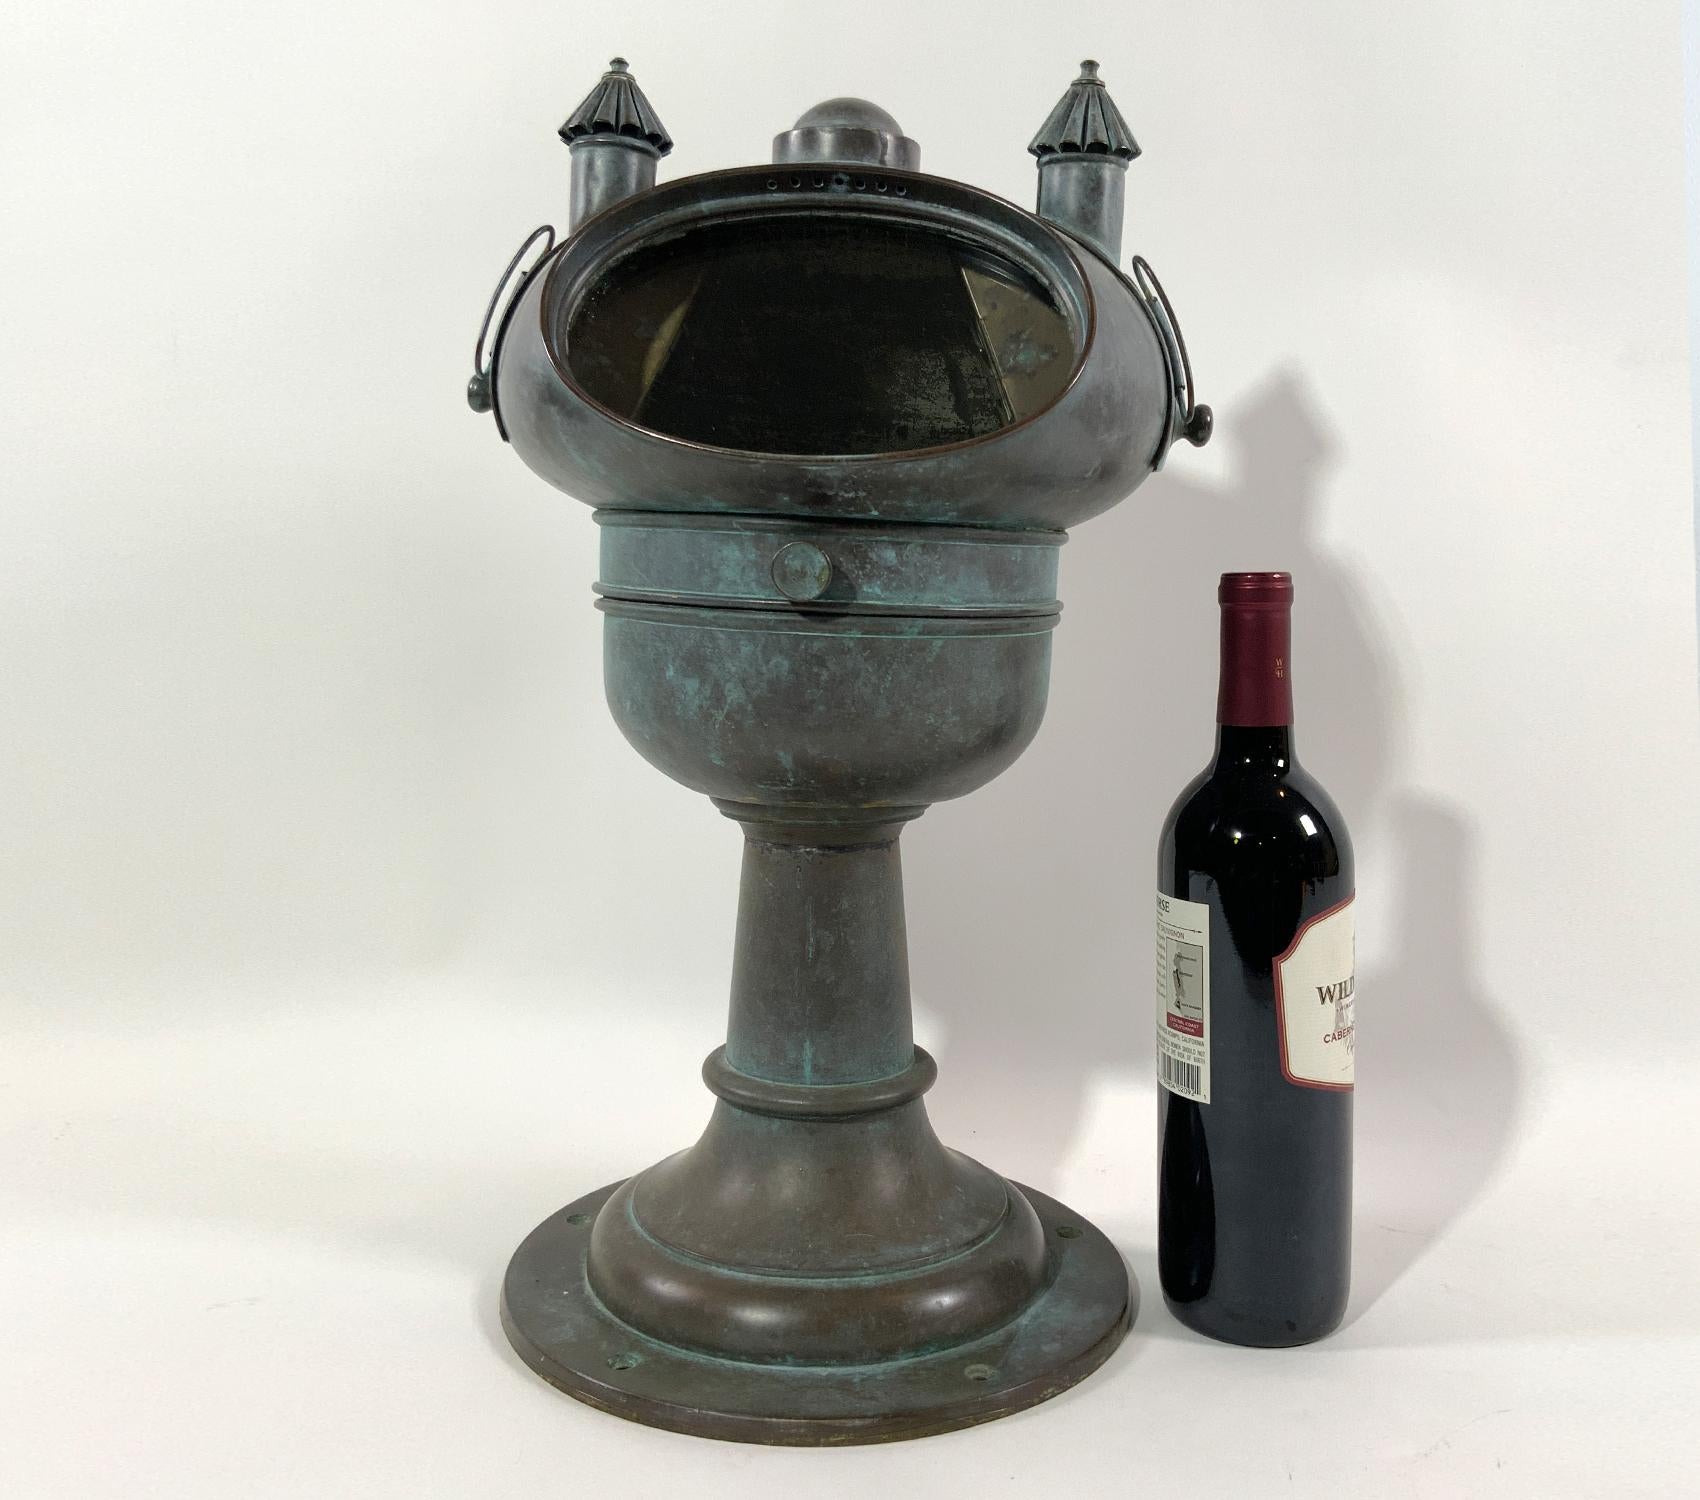 North American Antique Yacht Binnacle With Verdigris Finnish For Sale